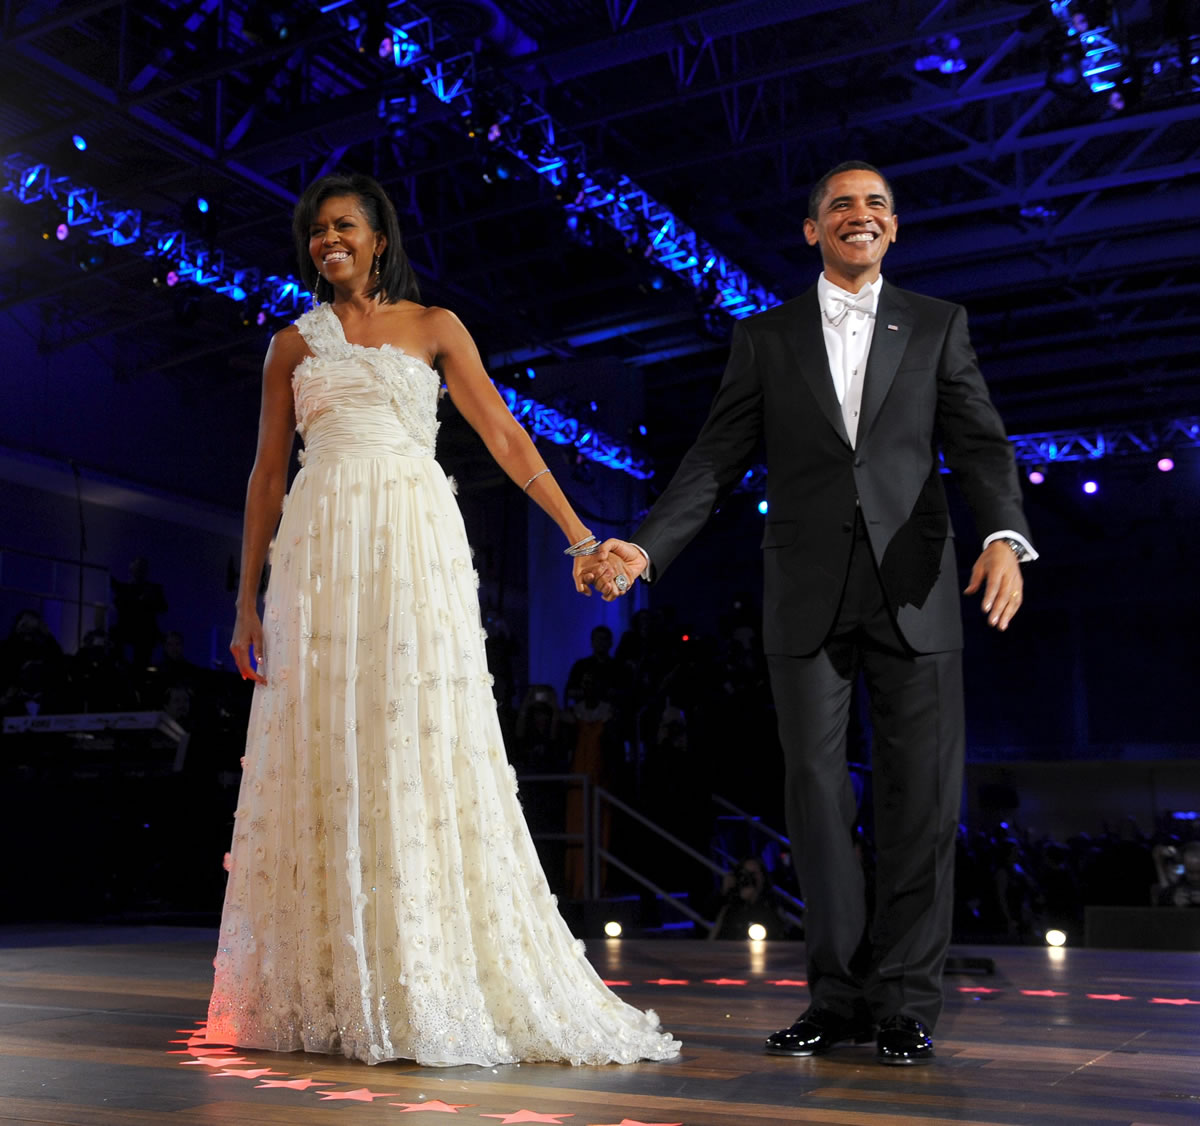 President Barrack Obama and First lady Michelle Obama enter the Neighborhood Ball for their first official dance in January 2009.